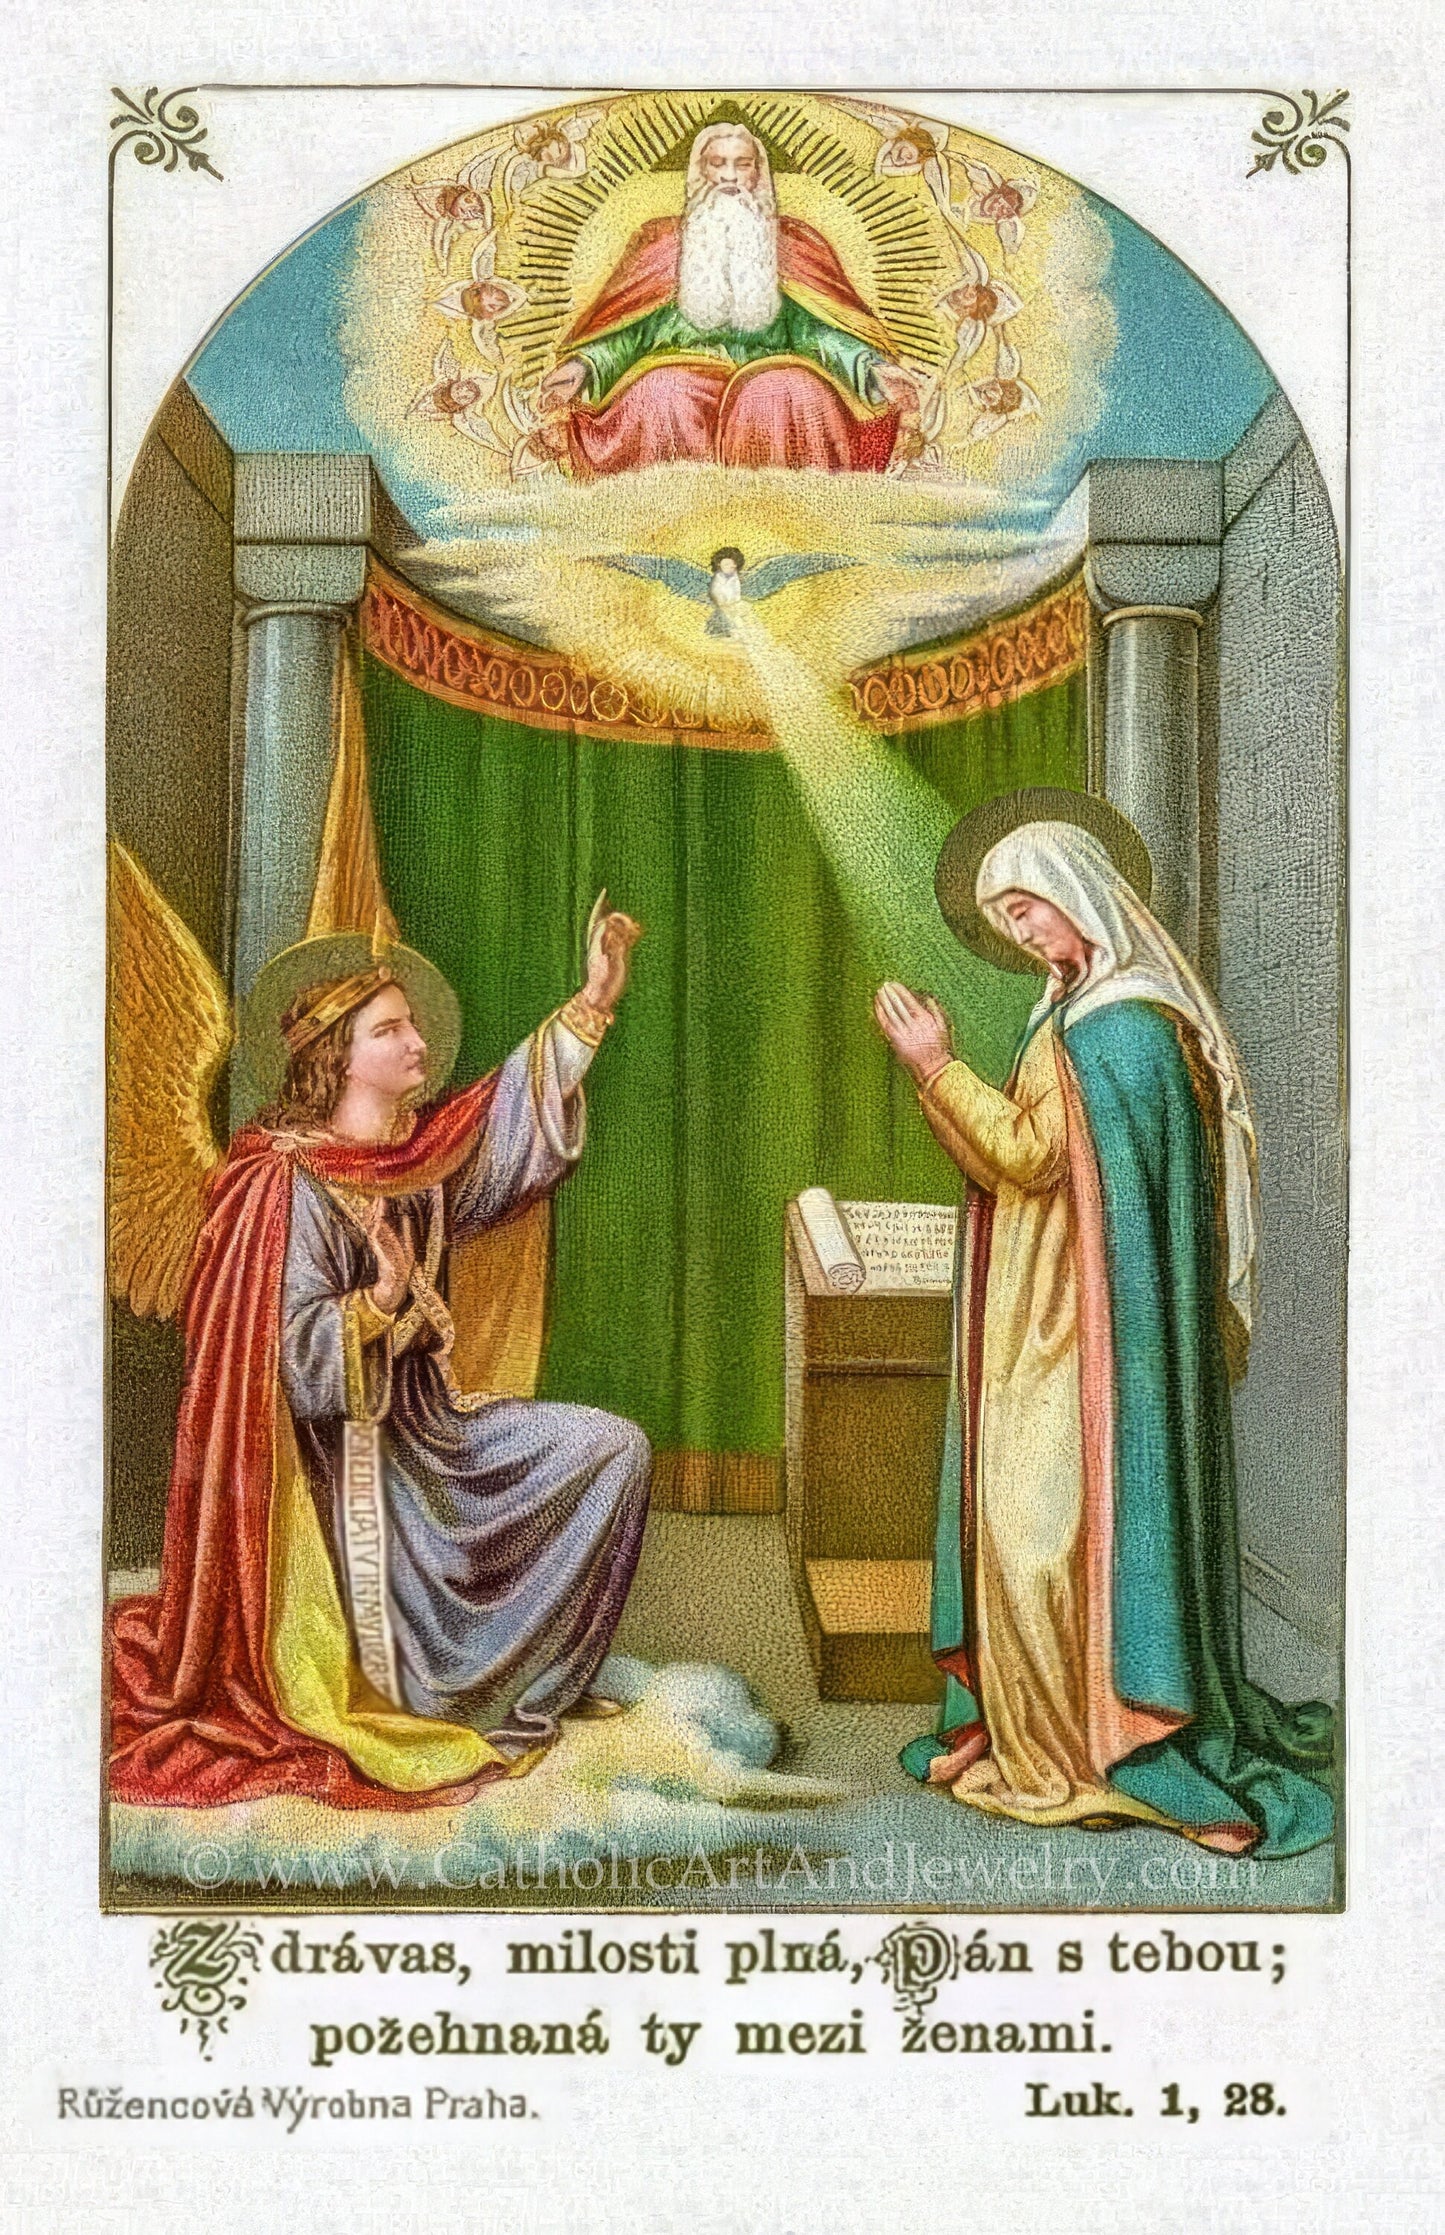 New! Holy Card – The Annunciation – From a 19th Century Czech Holy Card – pack of 10/100/1000 – Restored Vintage Holy Card